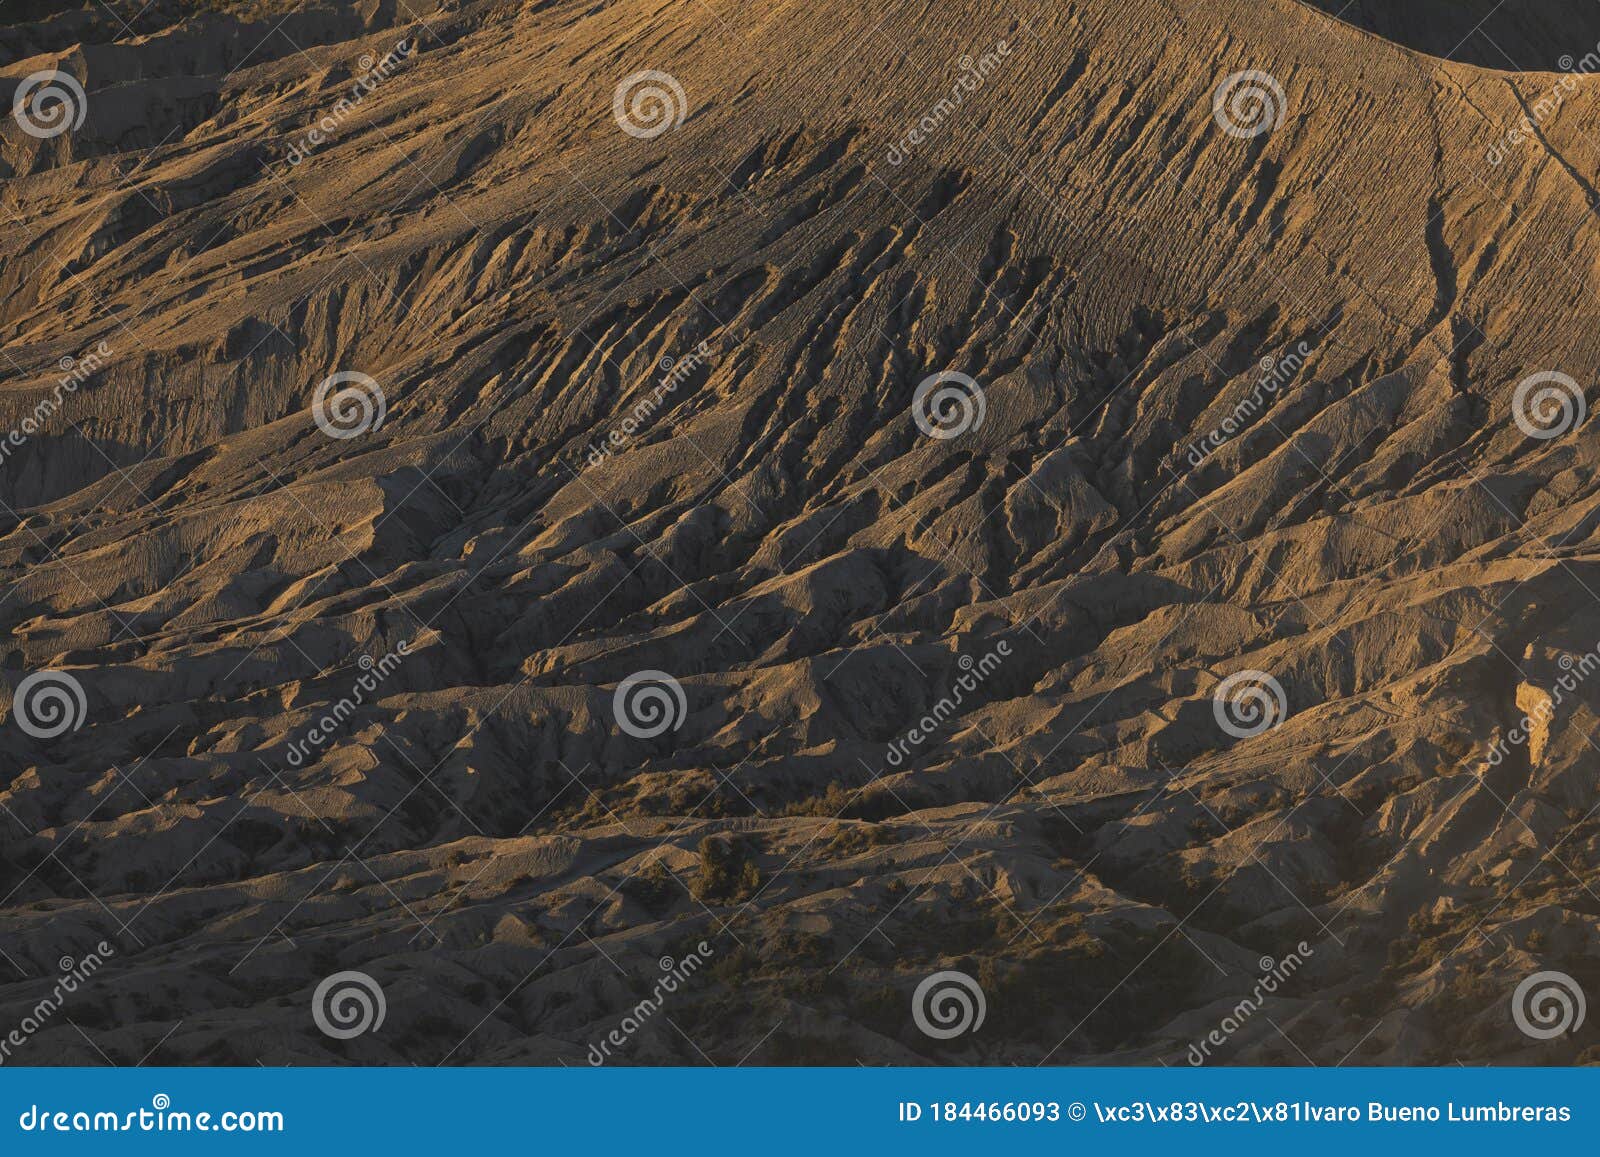 sunrise, close-up of the dunes and hillsides in bromo, indonesia